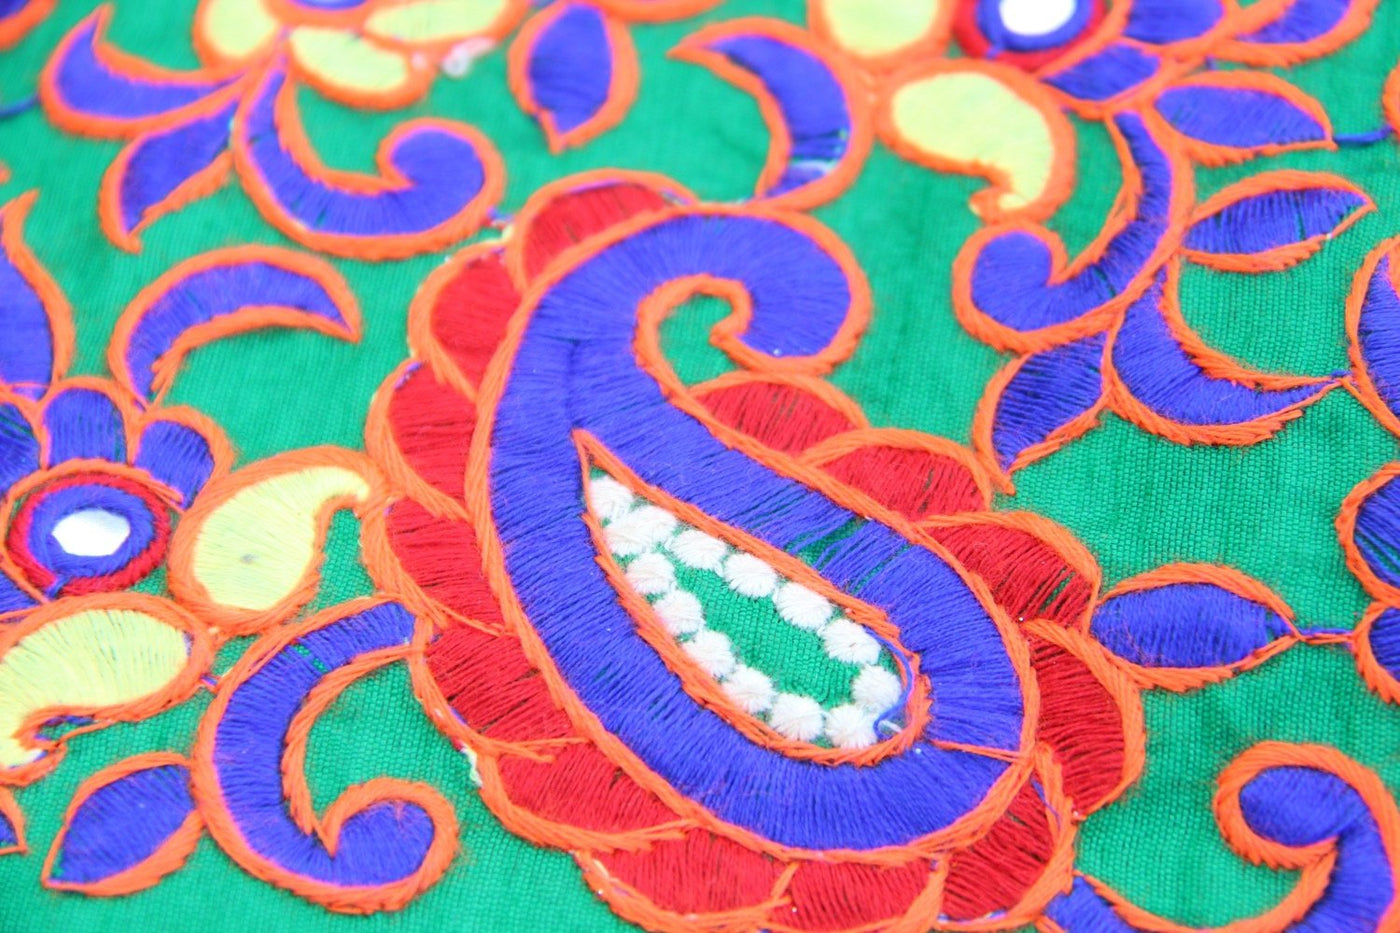 Embroidered Floral Fabric from India, Green Silk Wall Hanging Textile